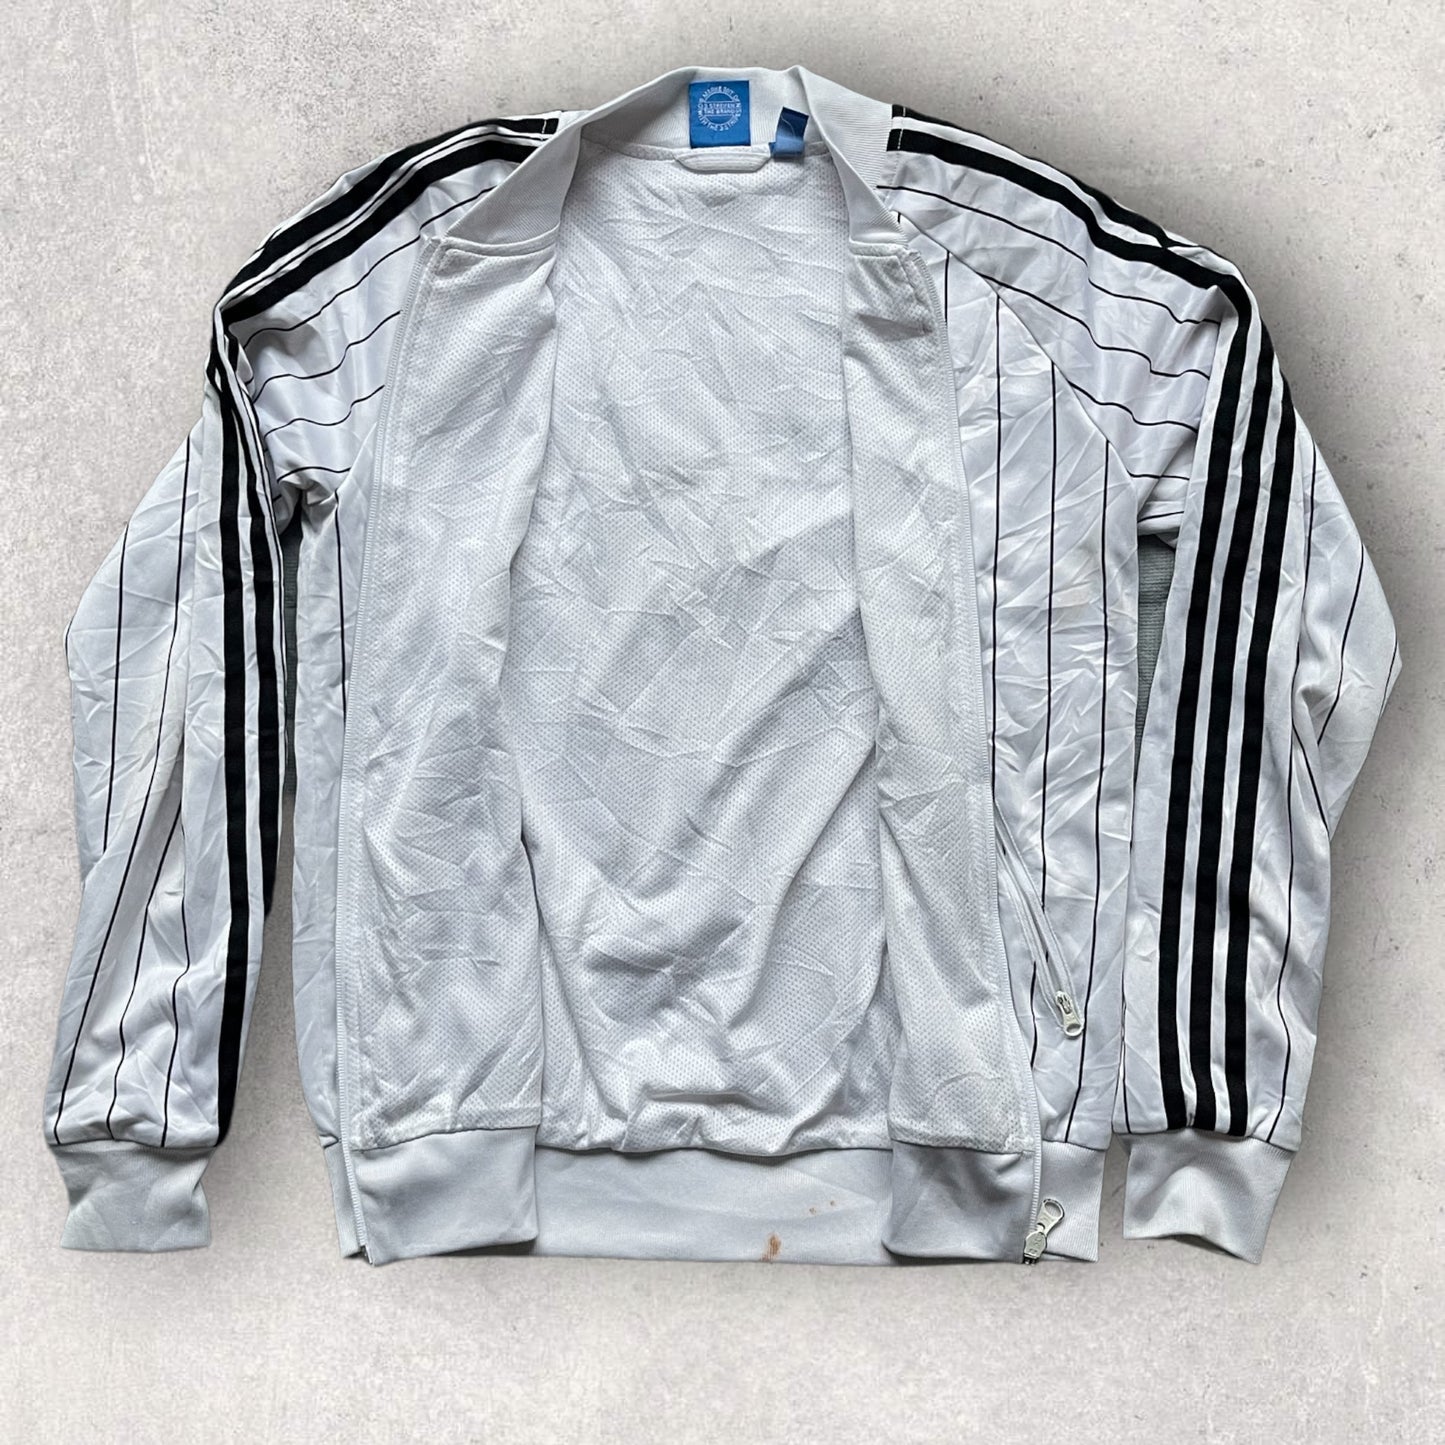 Vintage Adidas Tracksuit Top 80s Zip White S Size T_6